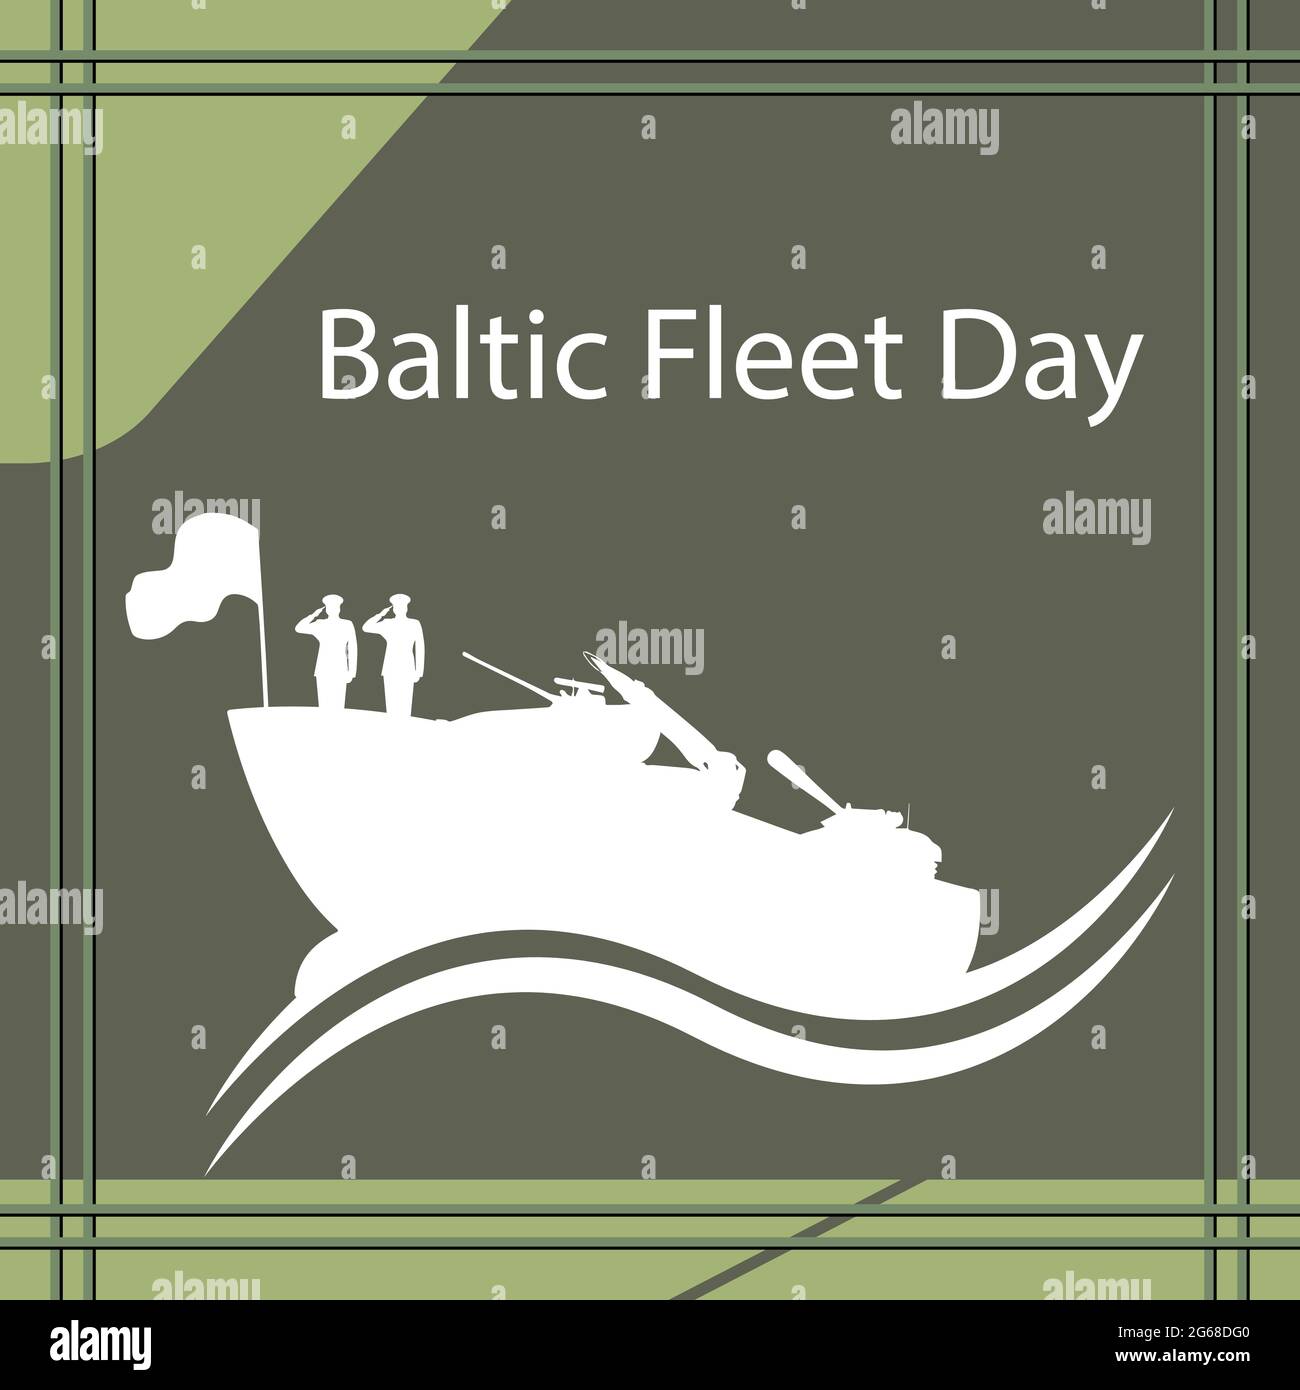 Baltic Fleet Day is annually observed in Russia on May 18. This date was chosen since the Baltic Fleet was established on May 18, 1703. Stock Vector